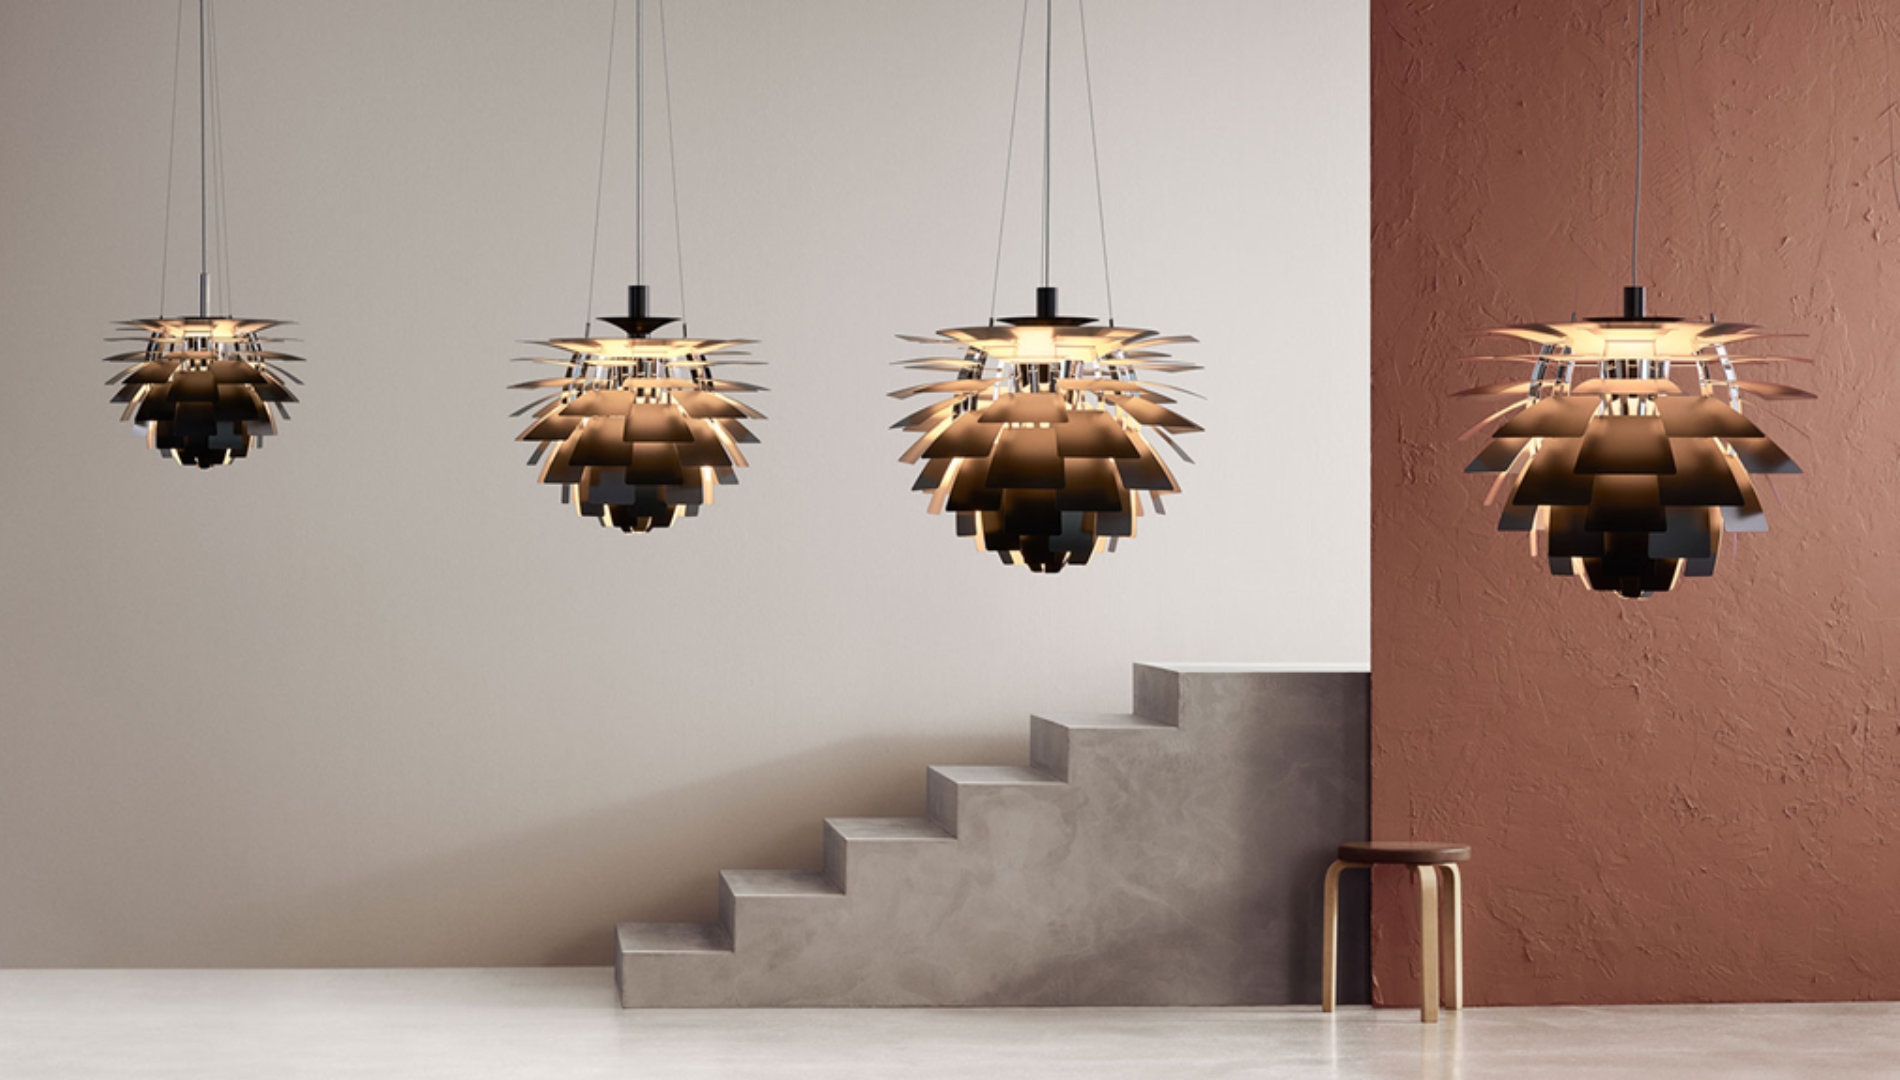 LOUIS POULSEN AND FENDI CASA HAVE JOINED FORCES TO LAUNCH AN